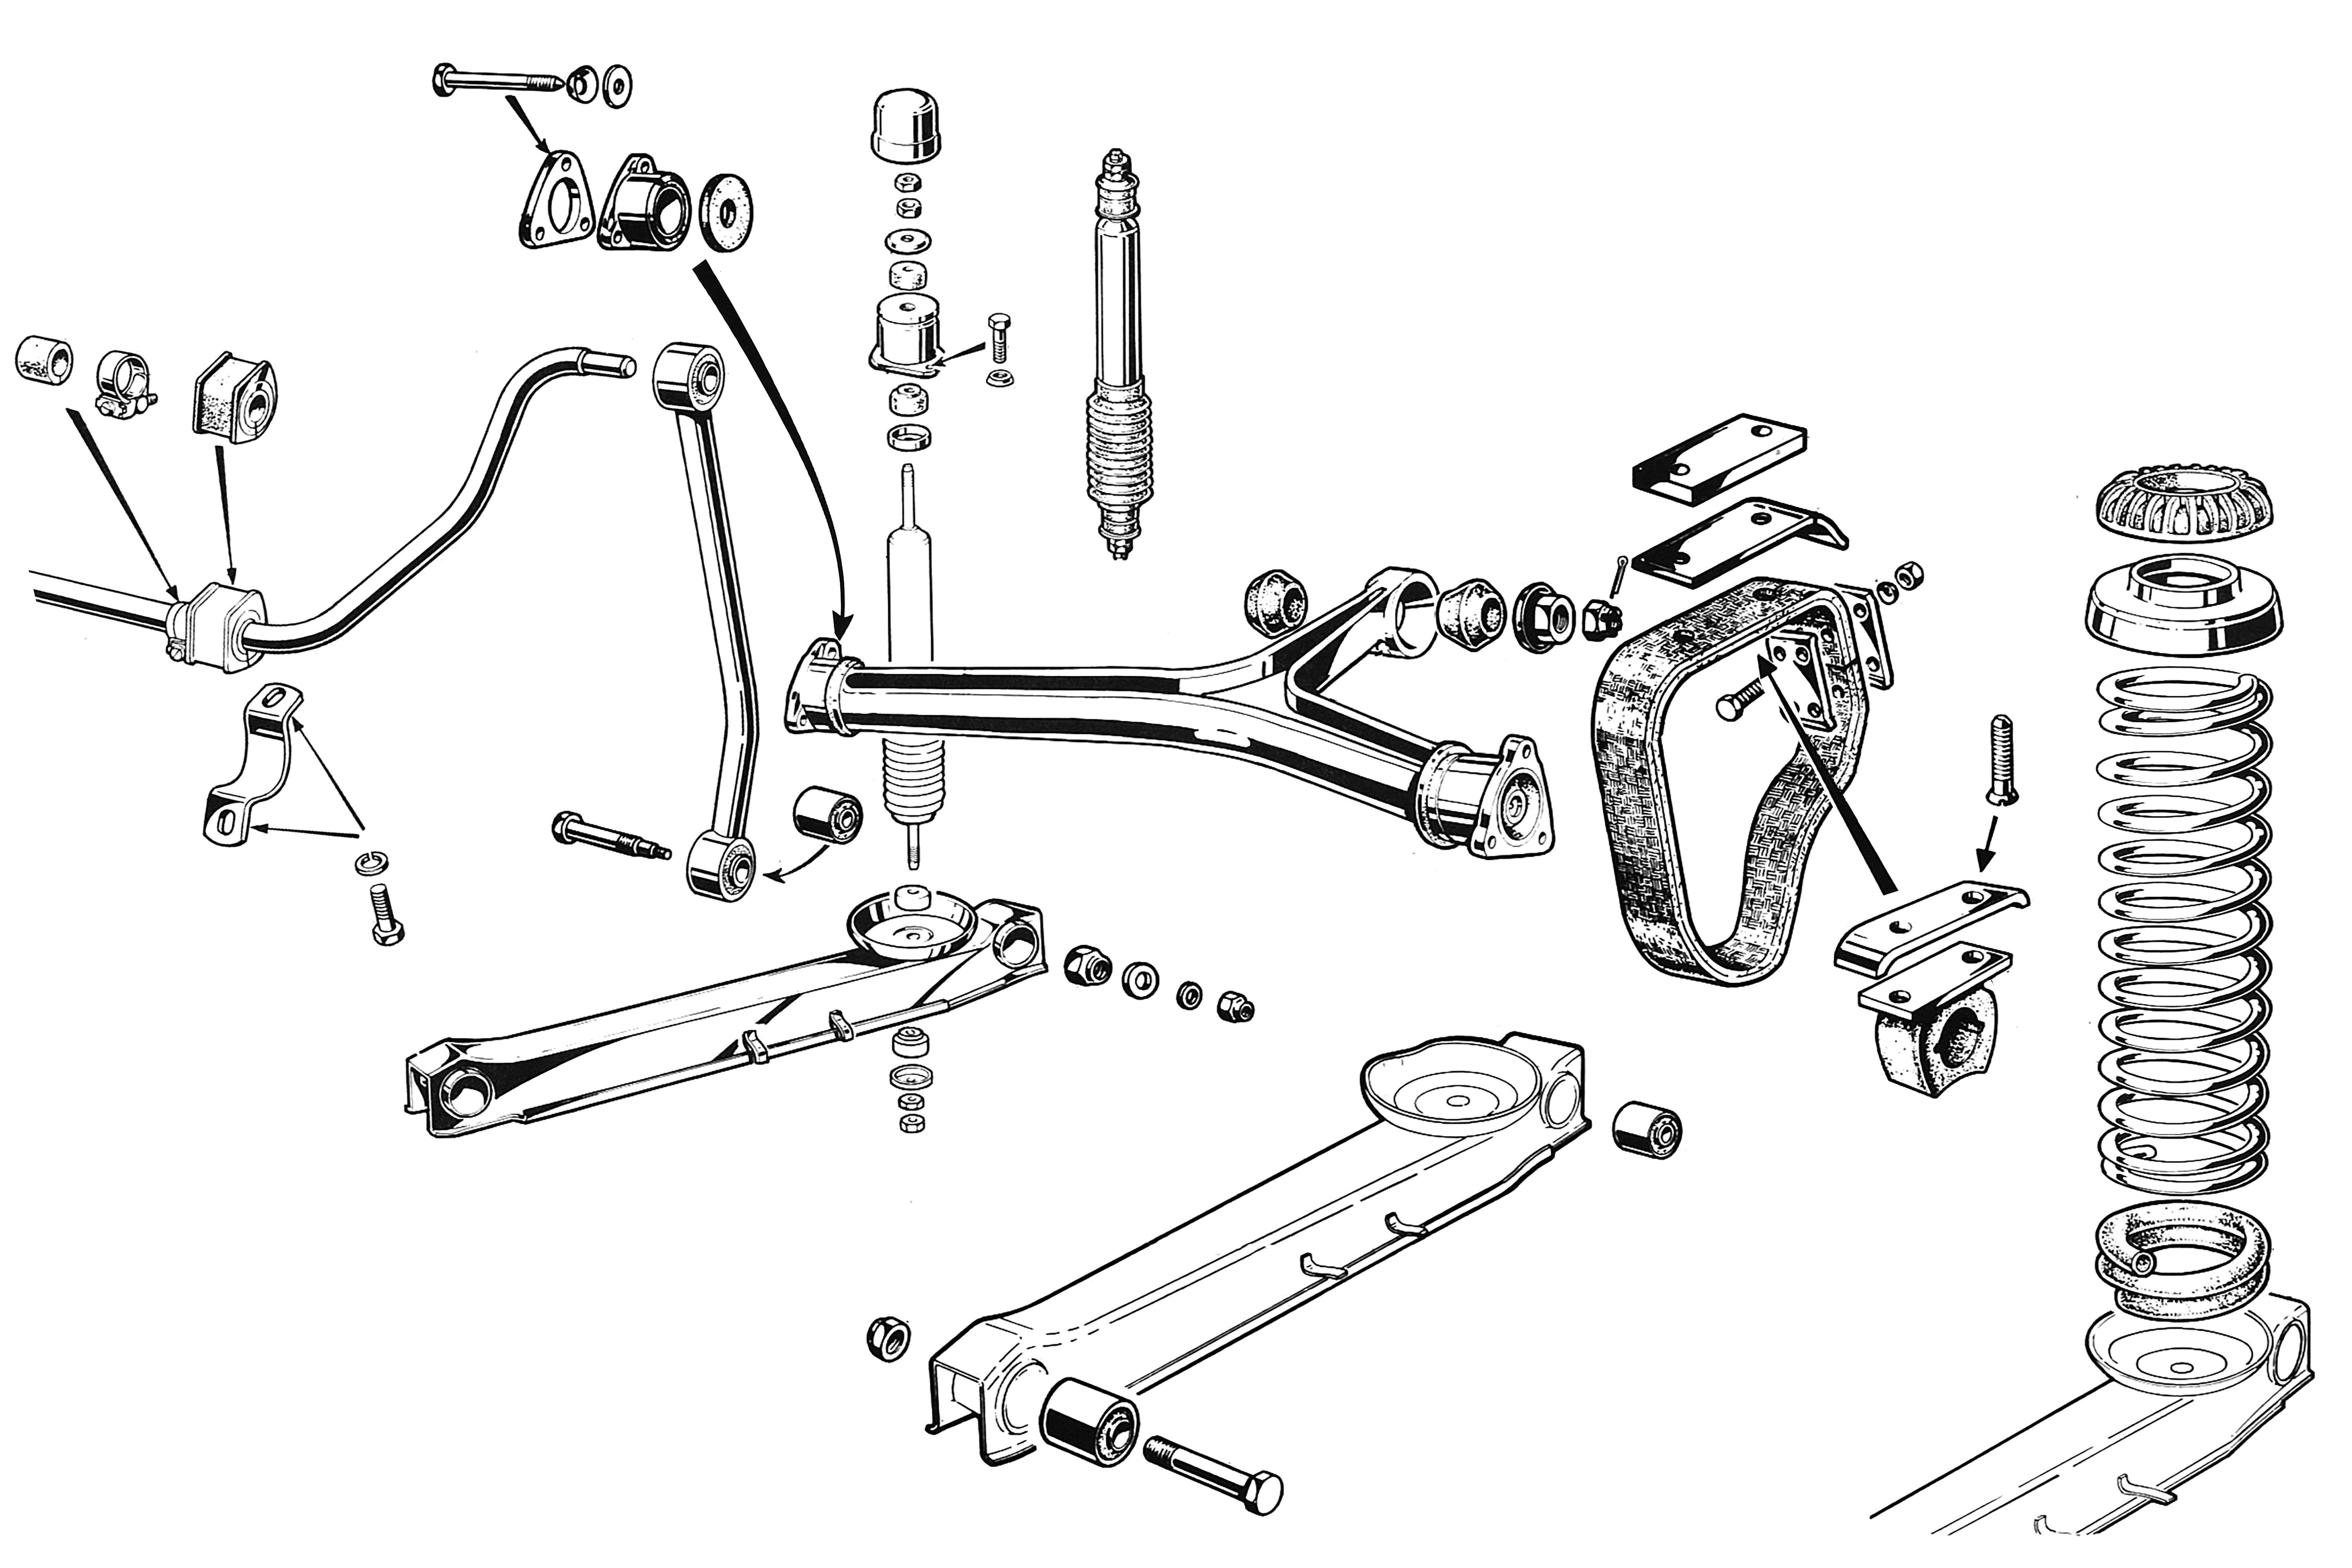 Diagram Of Front End Suspension | My Wiring DIagram